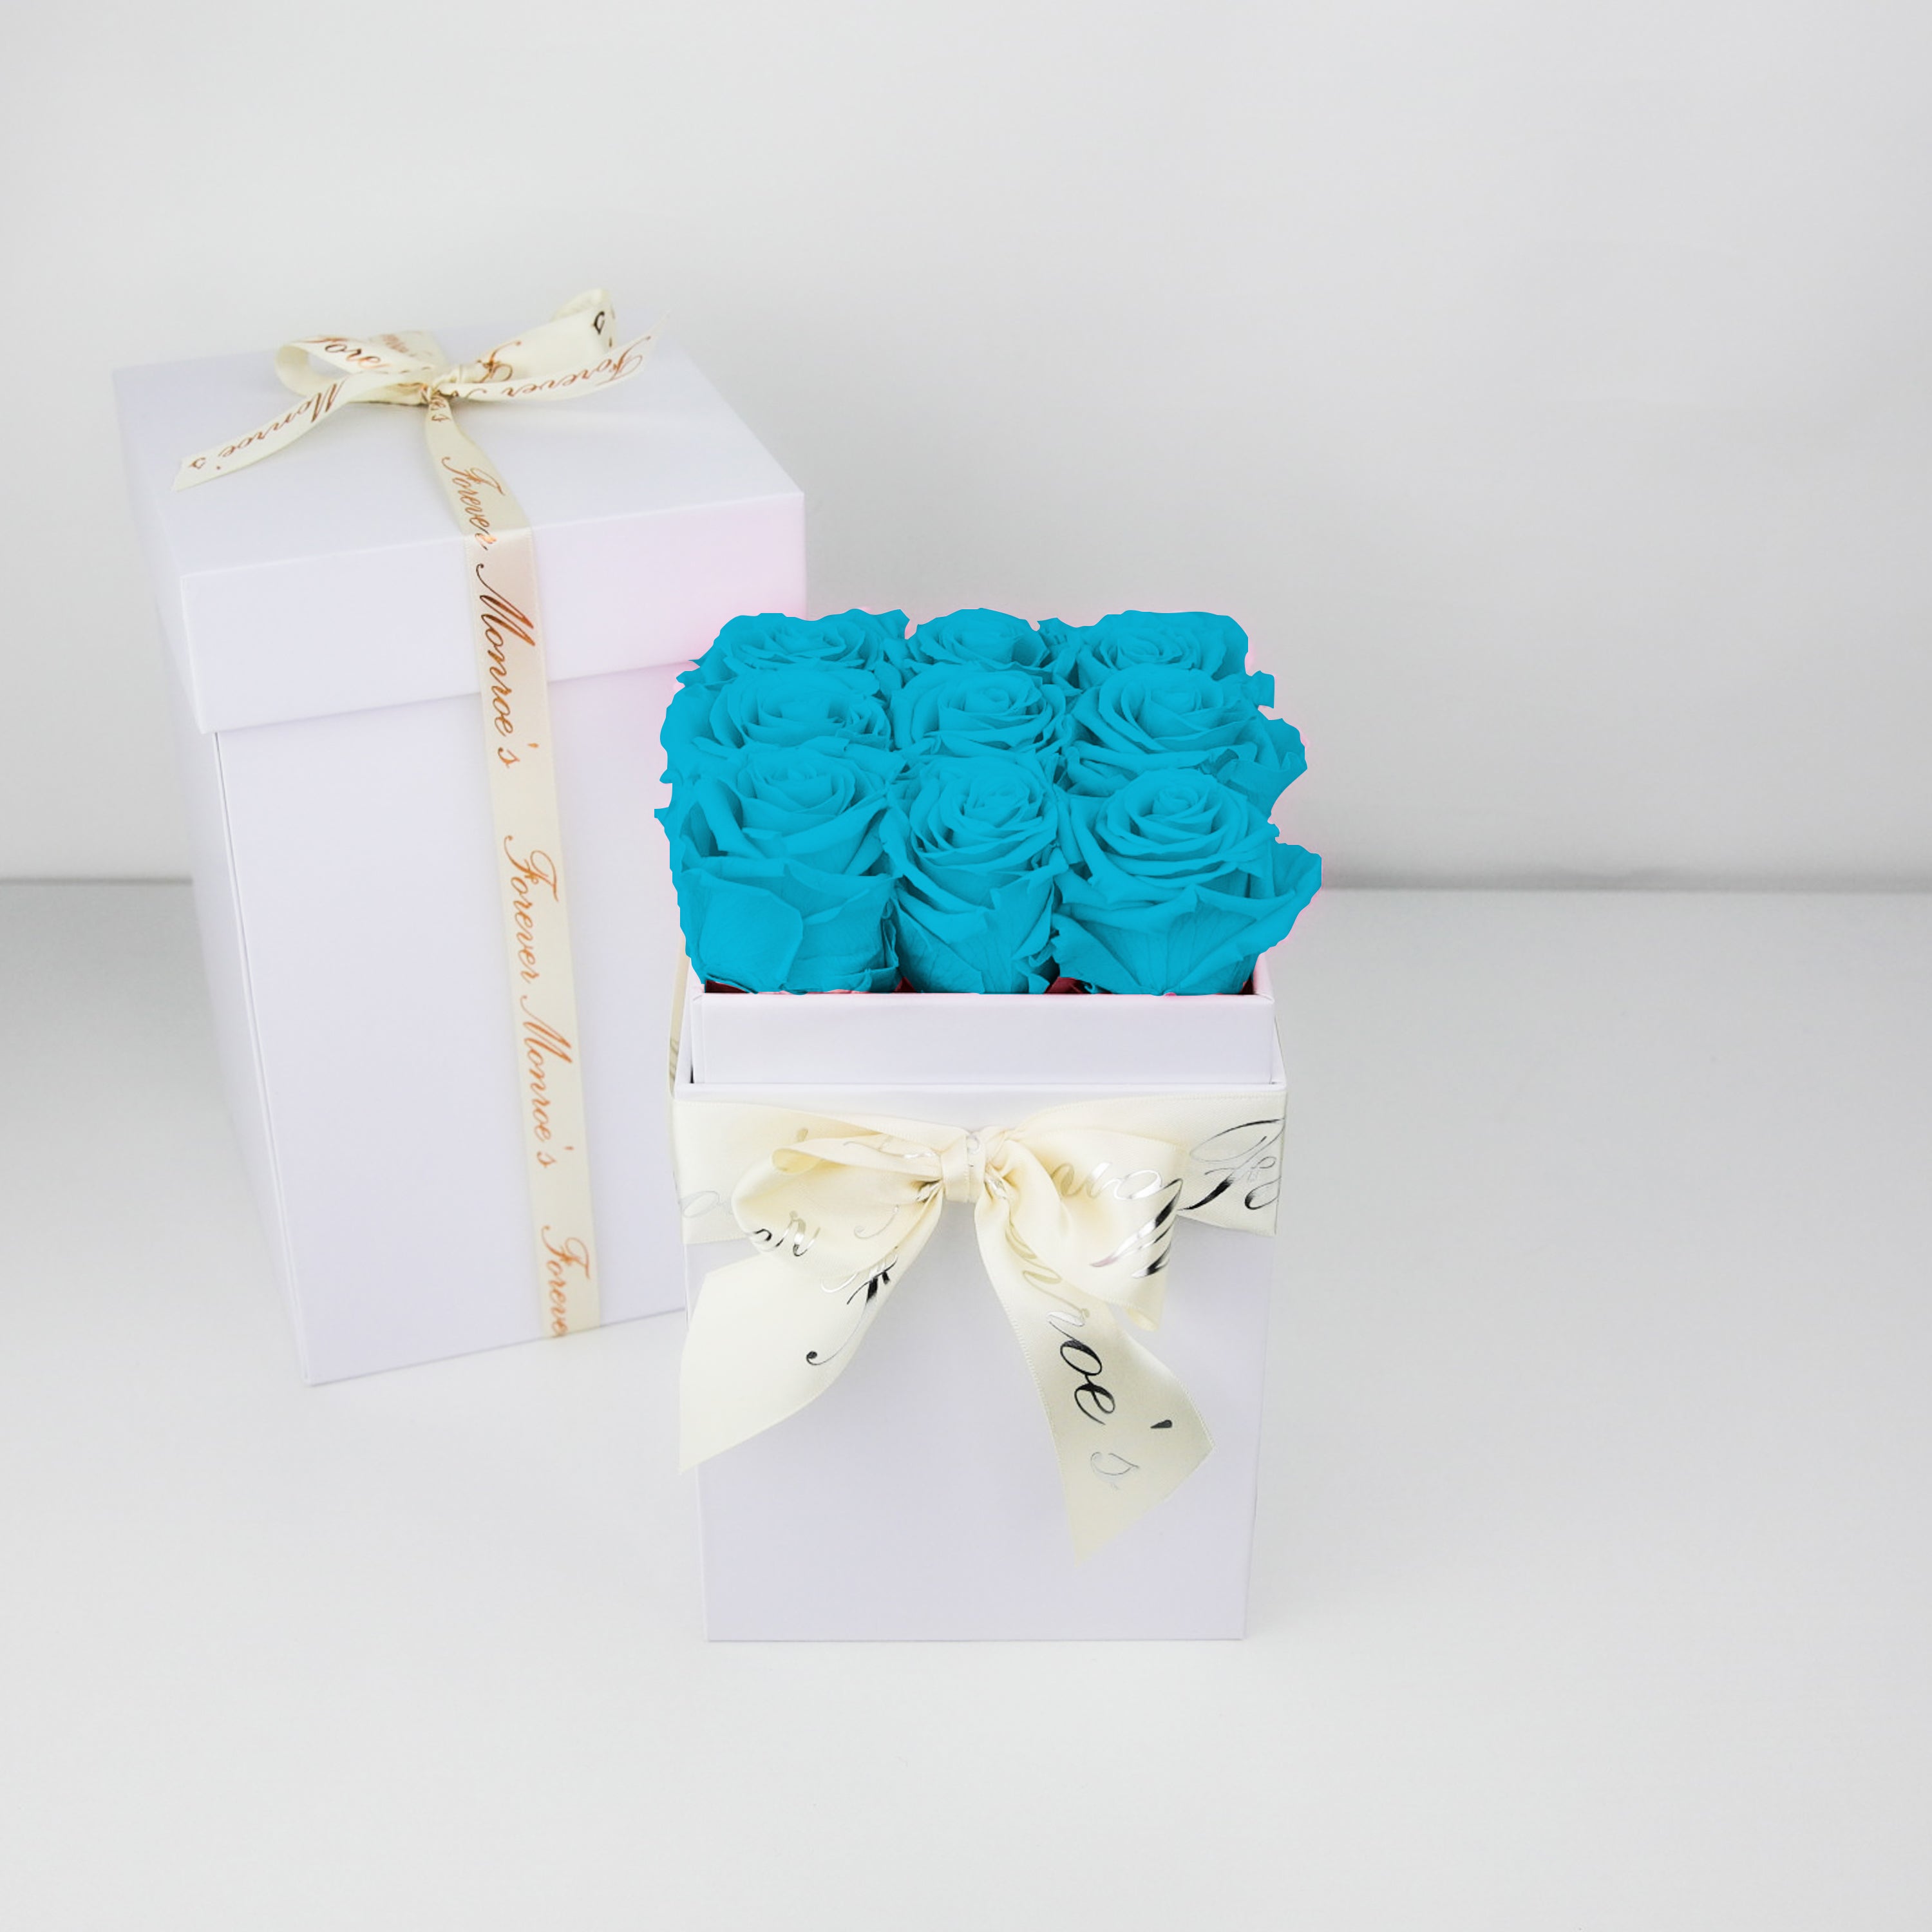 Butterfly Surprise Rose Box Bouquet - 9 Roses (White Box)